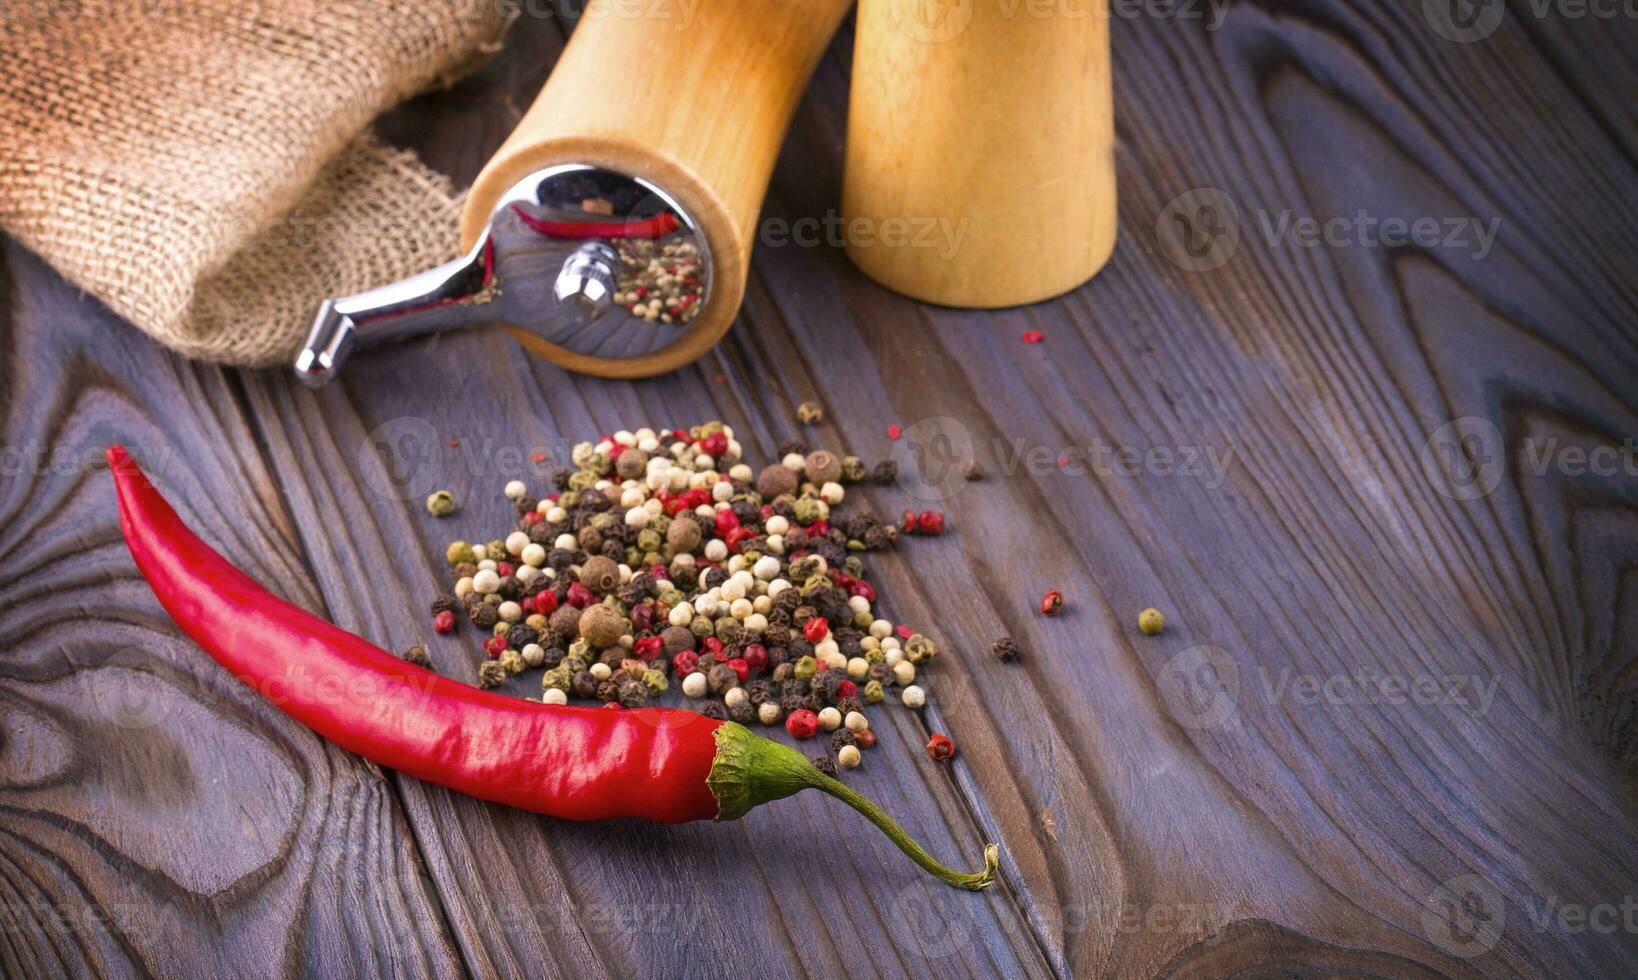 Black pepper corns, red hot chili pepper and Black pepper Powder on wooden background. photo